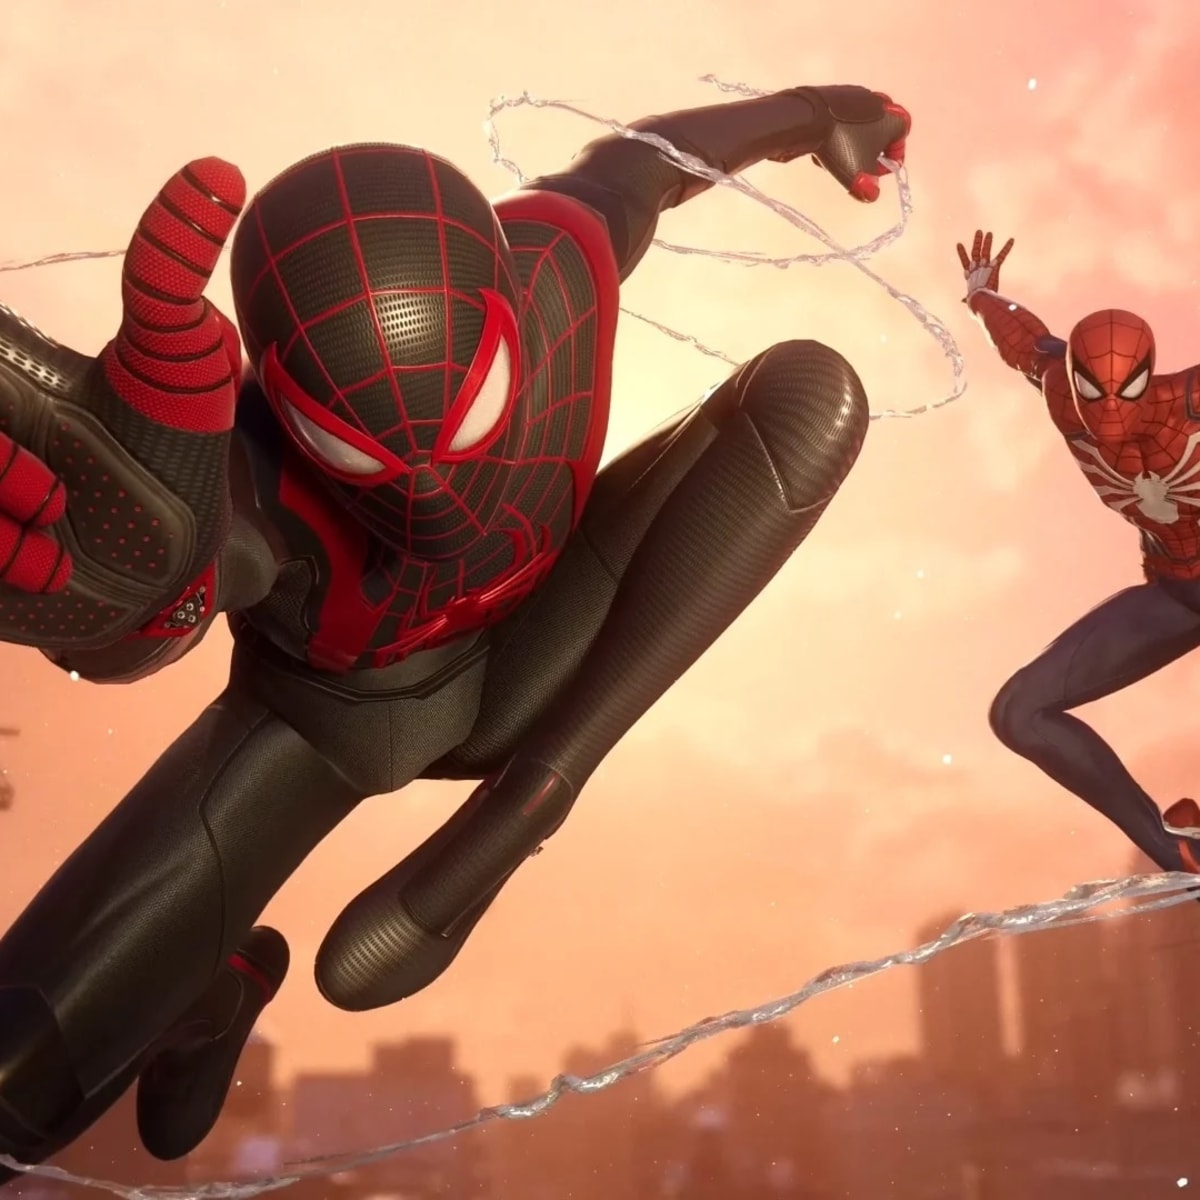 Marvel's Spider-Man 2 - Sois THIS the DLC?! 